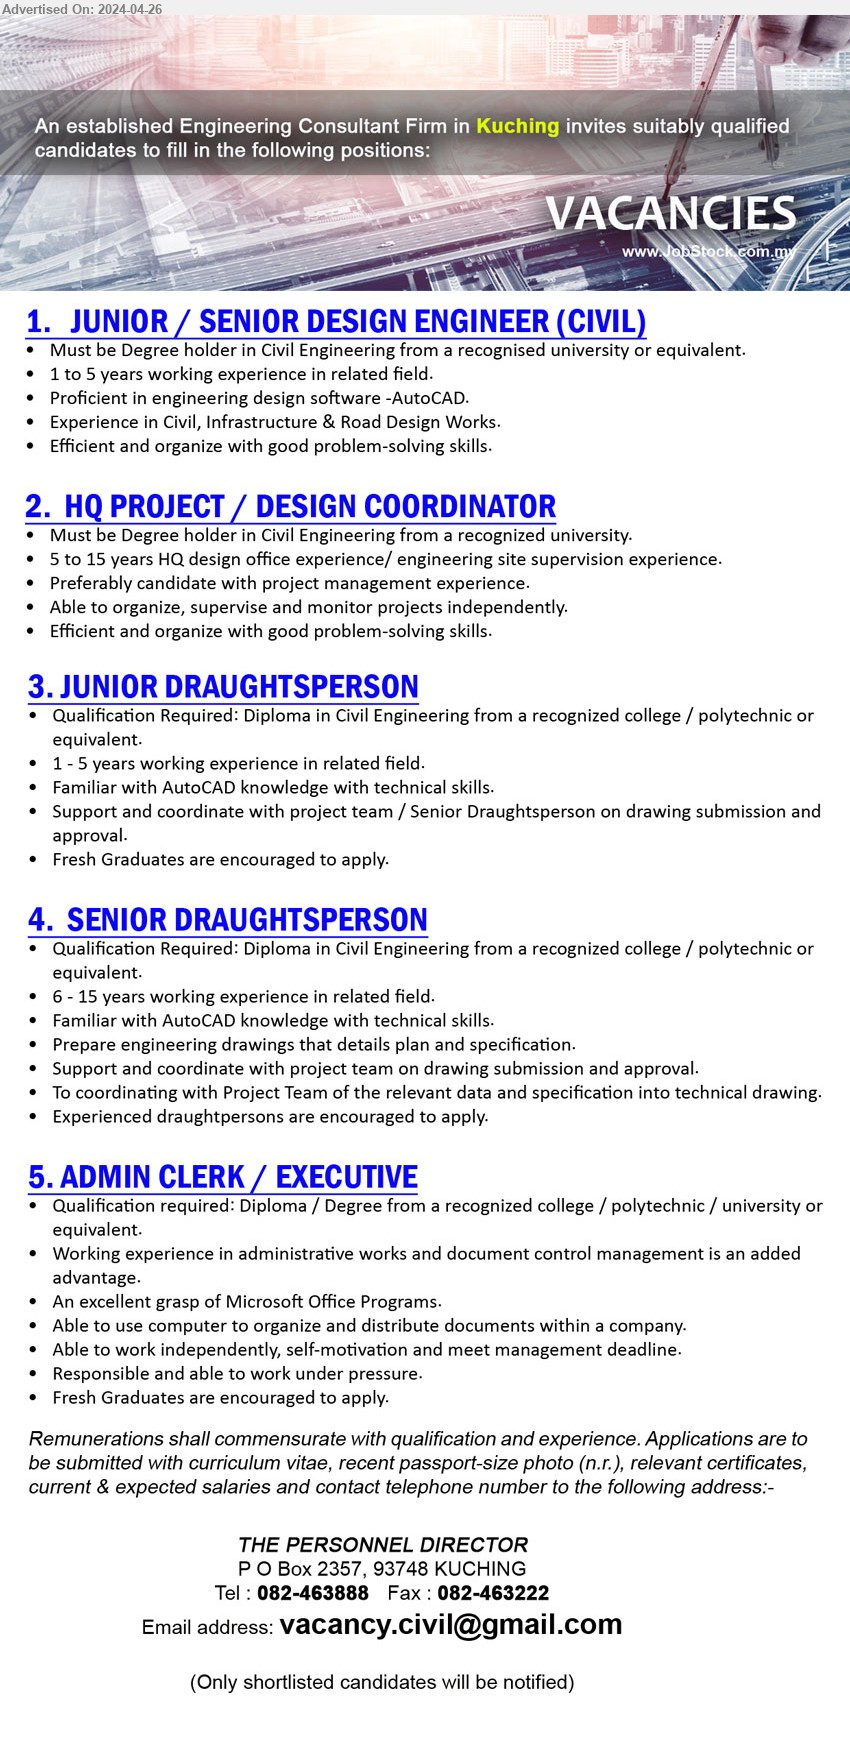 ADVERTISER (Engineering Consultant Firm) - 1. JUNIOR / SENIOR DESIGN ENGINEER (CIVIL) (Kuching), Degree holder in Civil Engineering, 1-5 yrs. exp.,...
2. HQ PROJECT / DESIGN COORDINATOR (Kuching), Degree holder in Civil Engineering, 5-15 yrs. exp.,...
3. JUNIOR DRAUGHTSPERSON (Kuching), Diploma in Civil Engineering from a recognized college / polytechnic, 1-5 yrs. exp.,...
4. SENIOR DRAUGHTSPERSON (Kuching), Diploma in Civil Engineering from a recognized college / polytechnic, 6-15 yrs. exp.,...
5. ADMIN CLERK / EXECUTIVE (Kuching), Diploma / Degree from a recognized college / polytechnic / university, An excellent grasp of Microsoft Office Programs,...
Call 082-463888 / Email resume to ...
